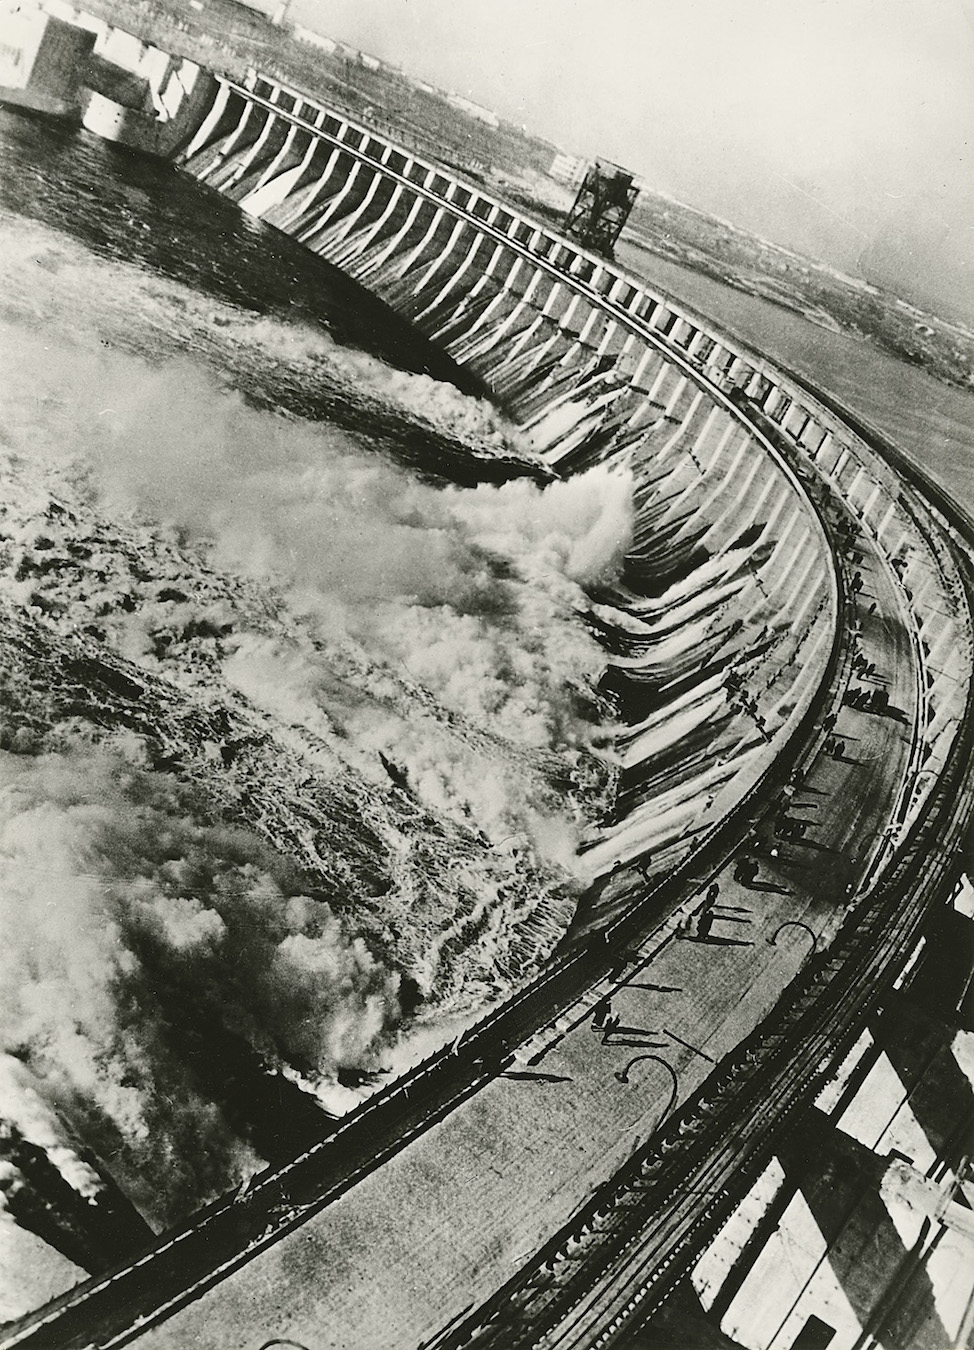 The Dnieper Hydroelectric Station by Max Alpert, 1937, printed circa 1960s